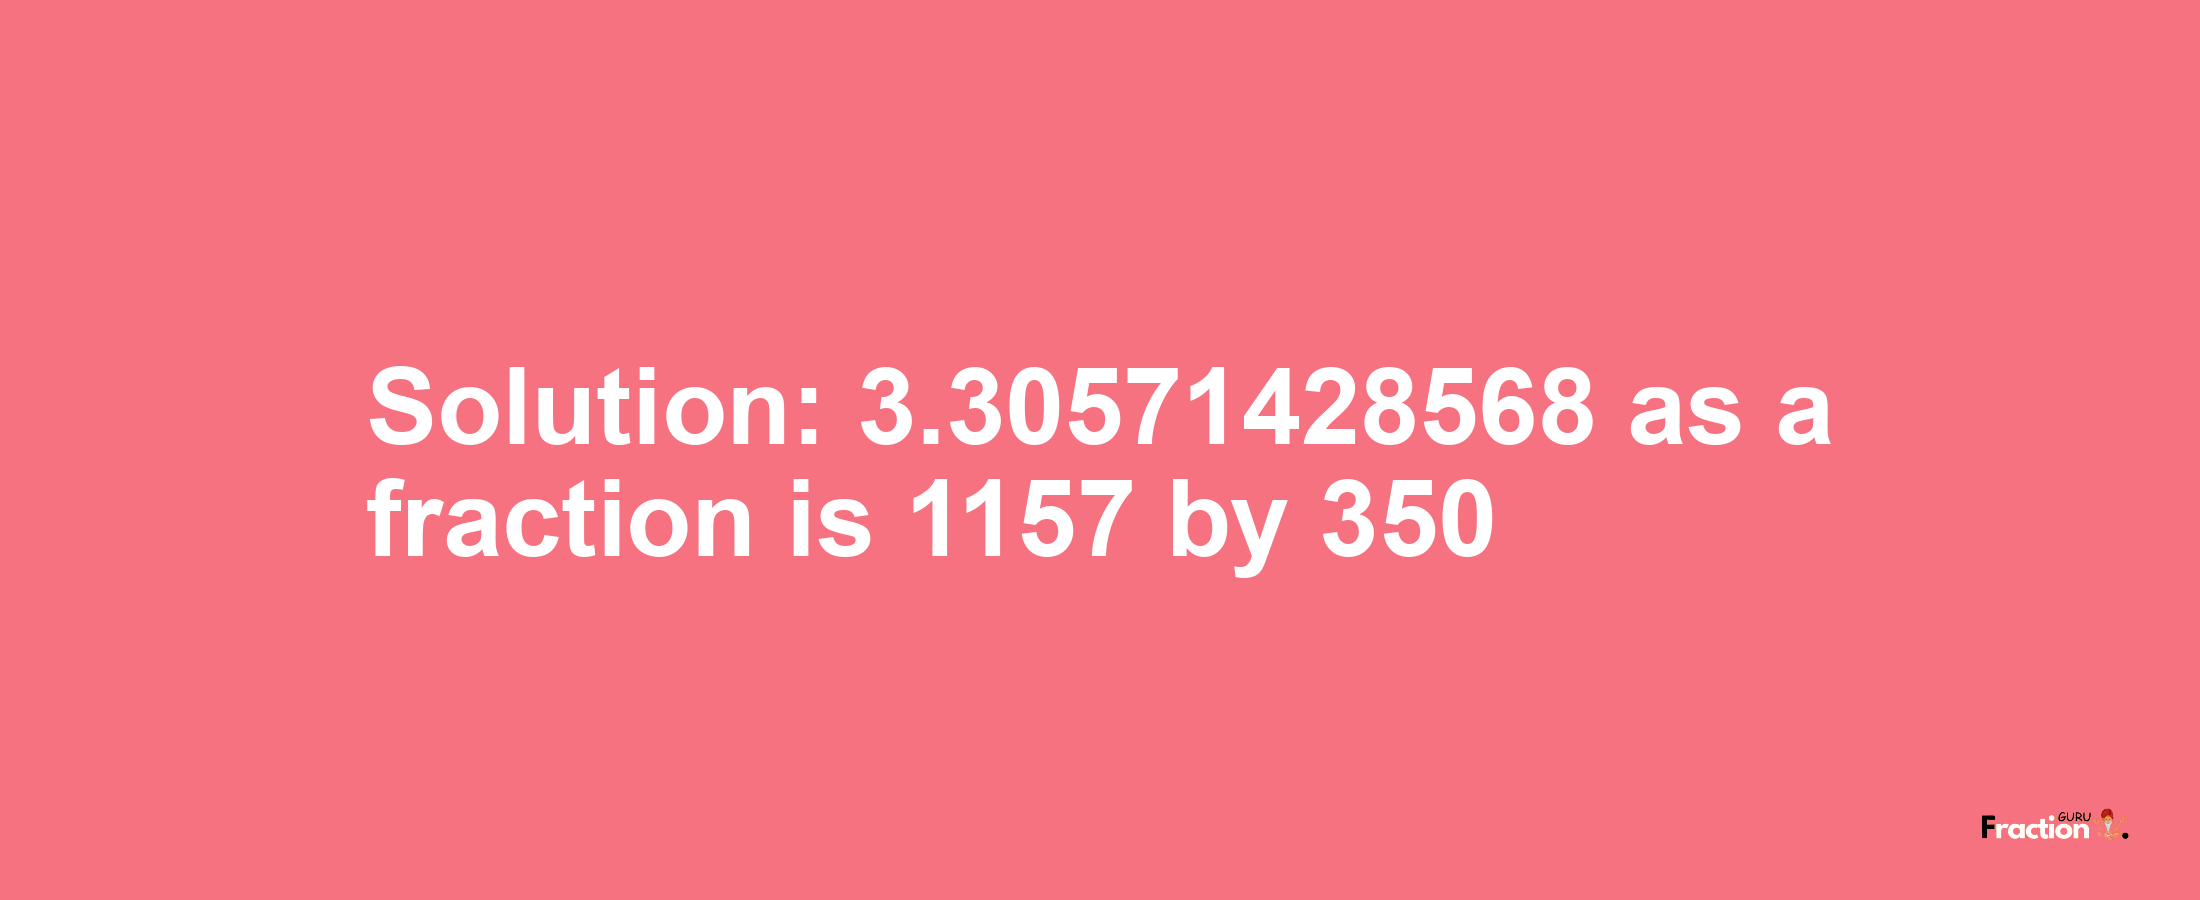 Solution:3.30571428568 as a fraction is 1157/350